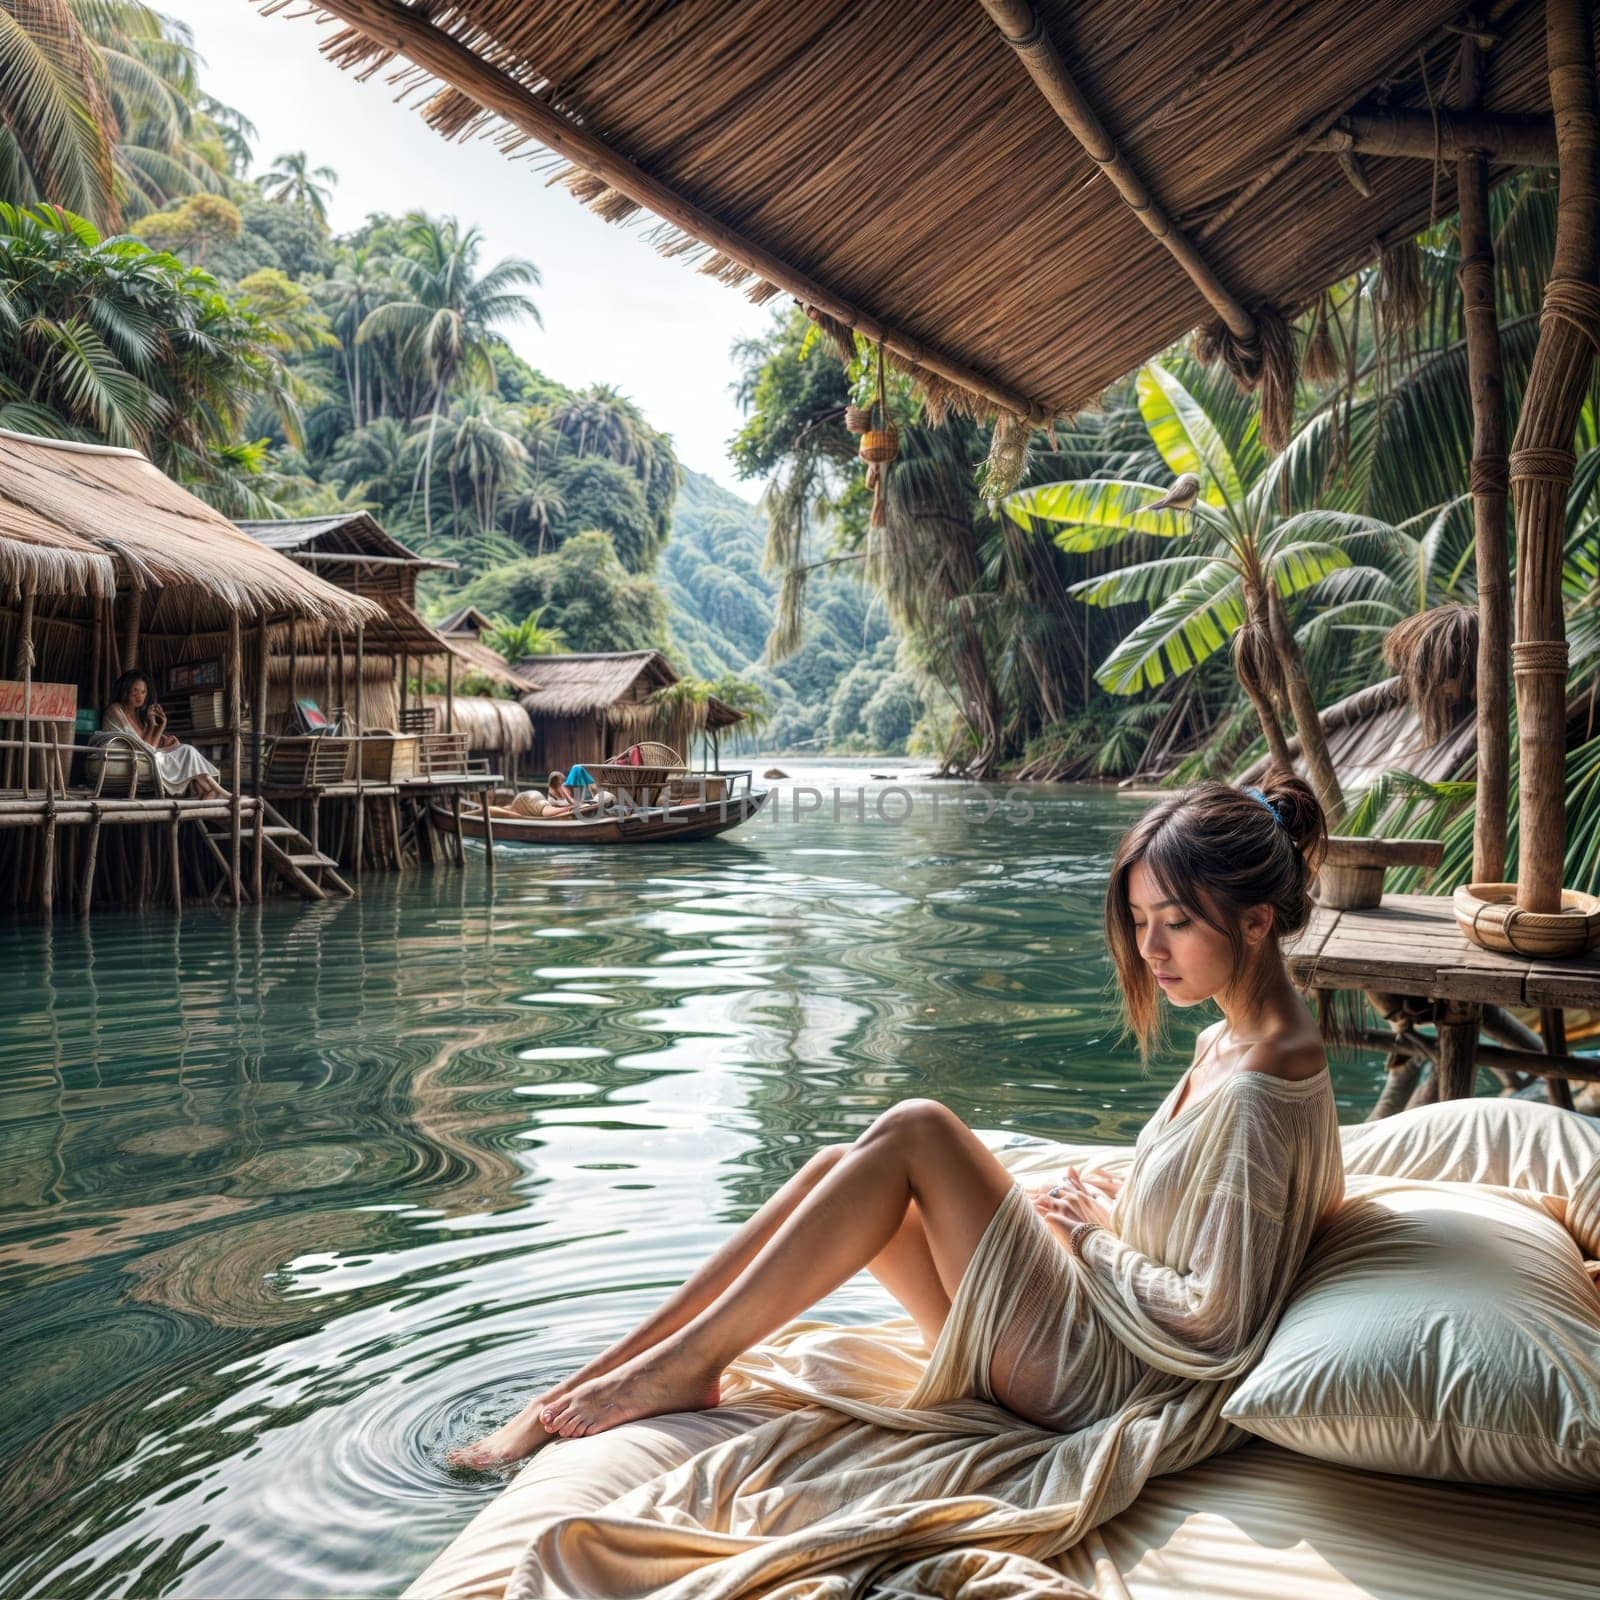 A woman enjoys leisure by the river, surrounded by natures landscape by vicnt